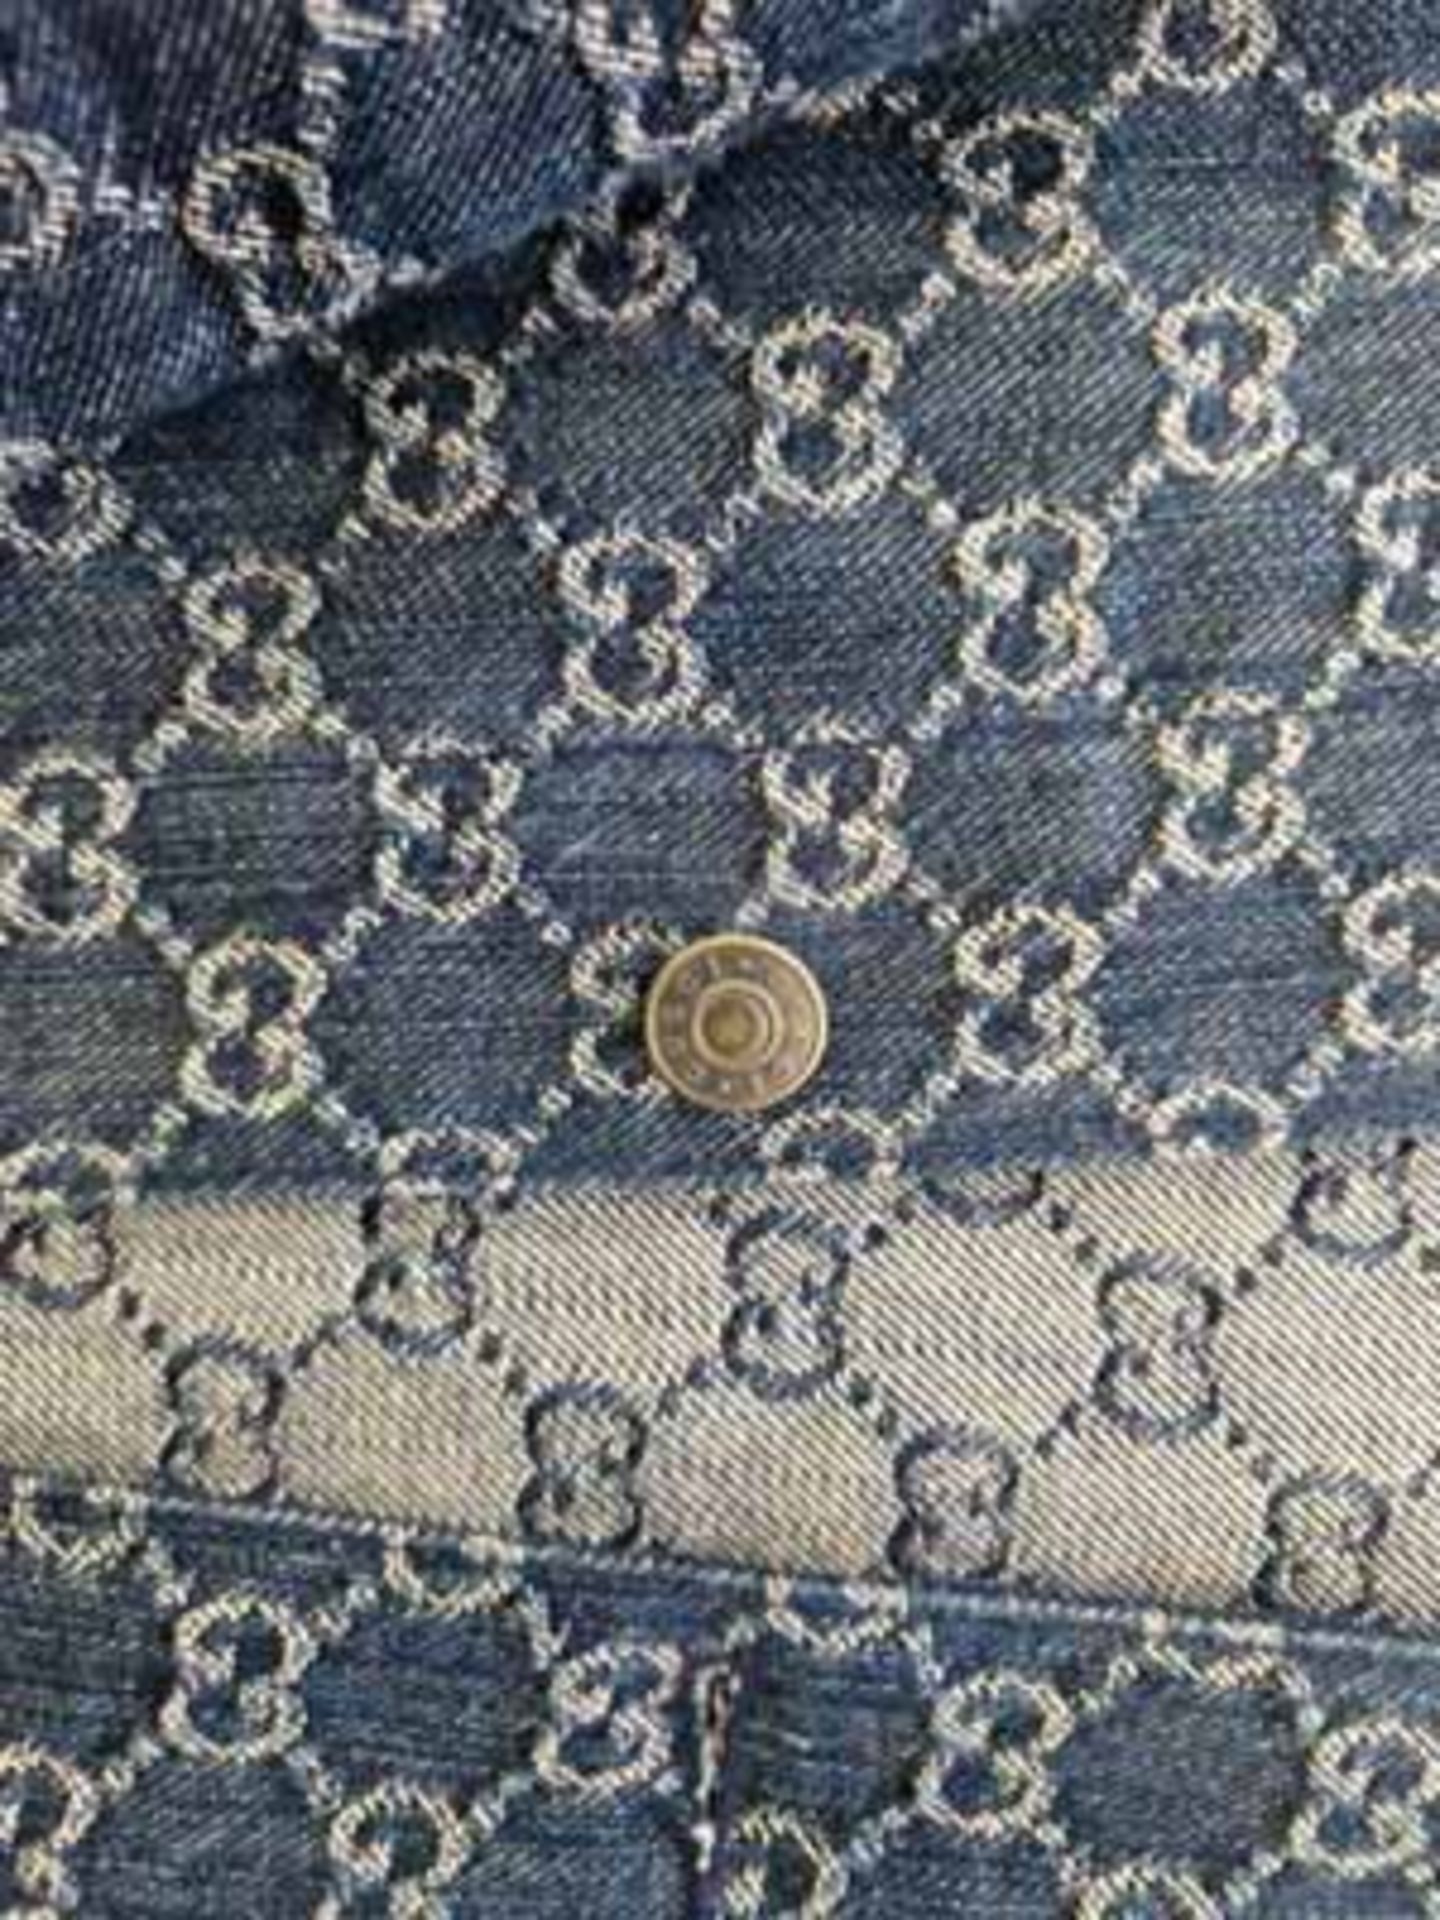 A GUCCI Denim Jacket with Double G Monogram over Three Quarters and Brown Leather Trim Cuffs and - Image 3 of 5